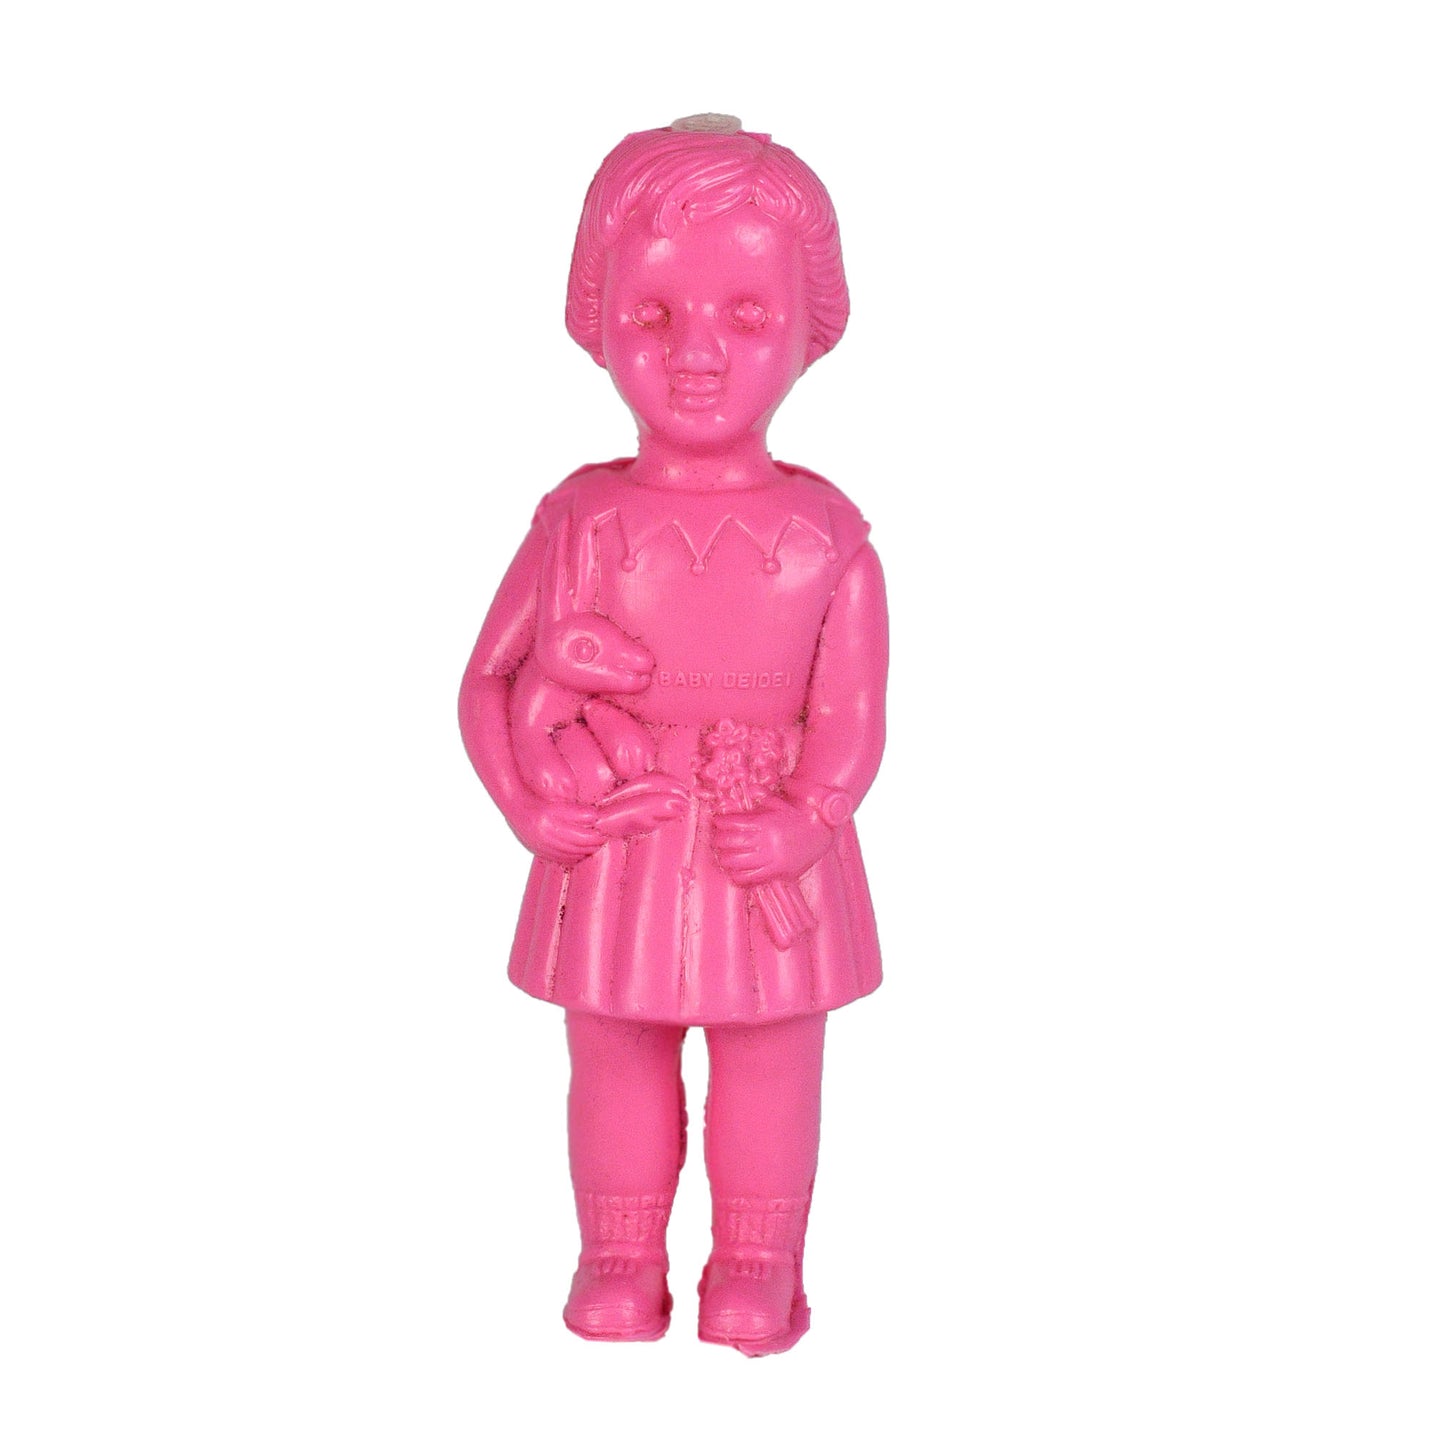 pink doll